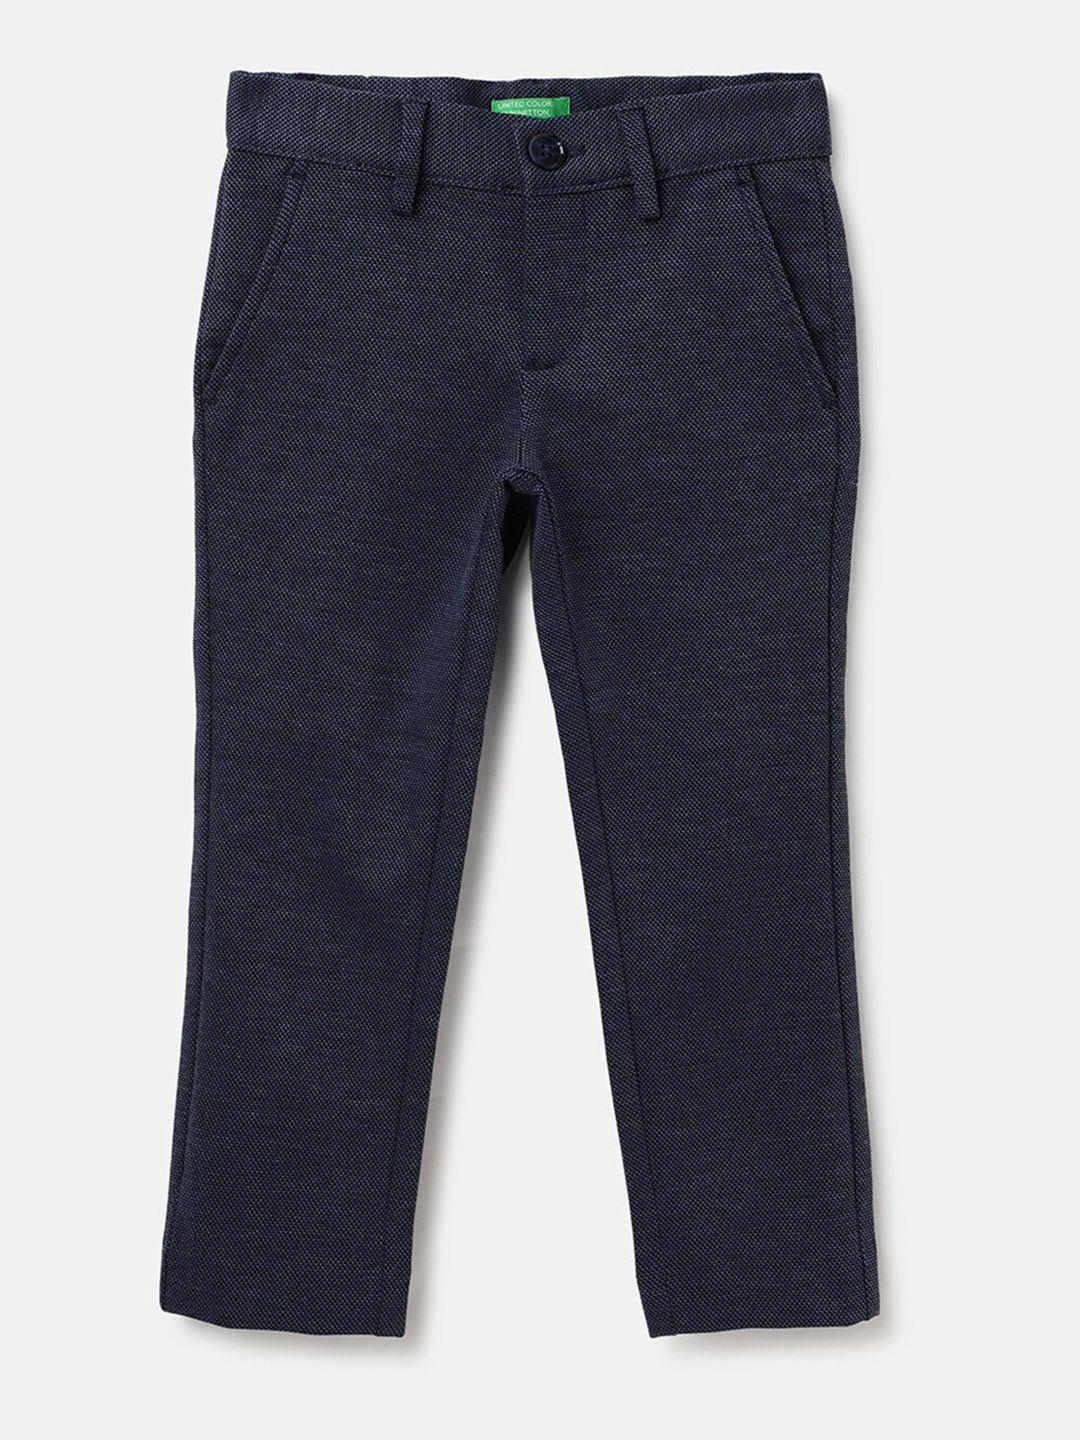 united-colors-of-benetton-boys-self-design-slim-fit-chinos-trousers